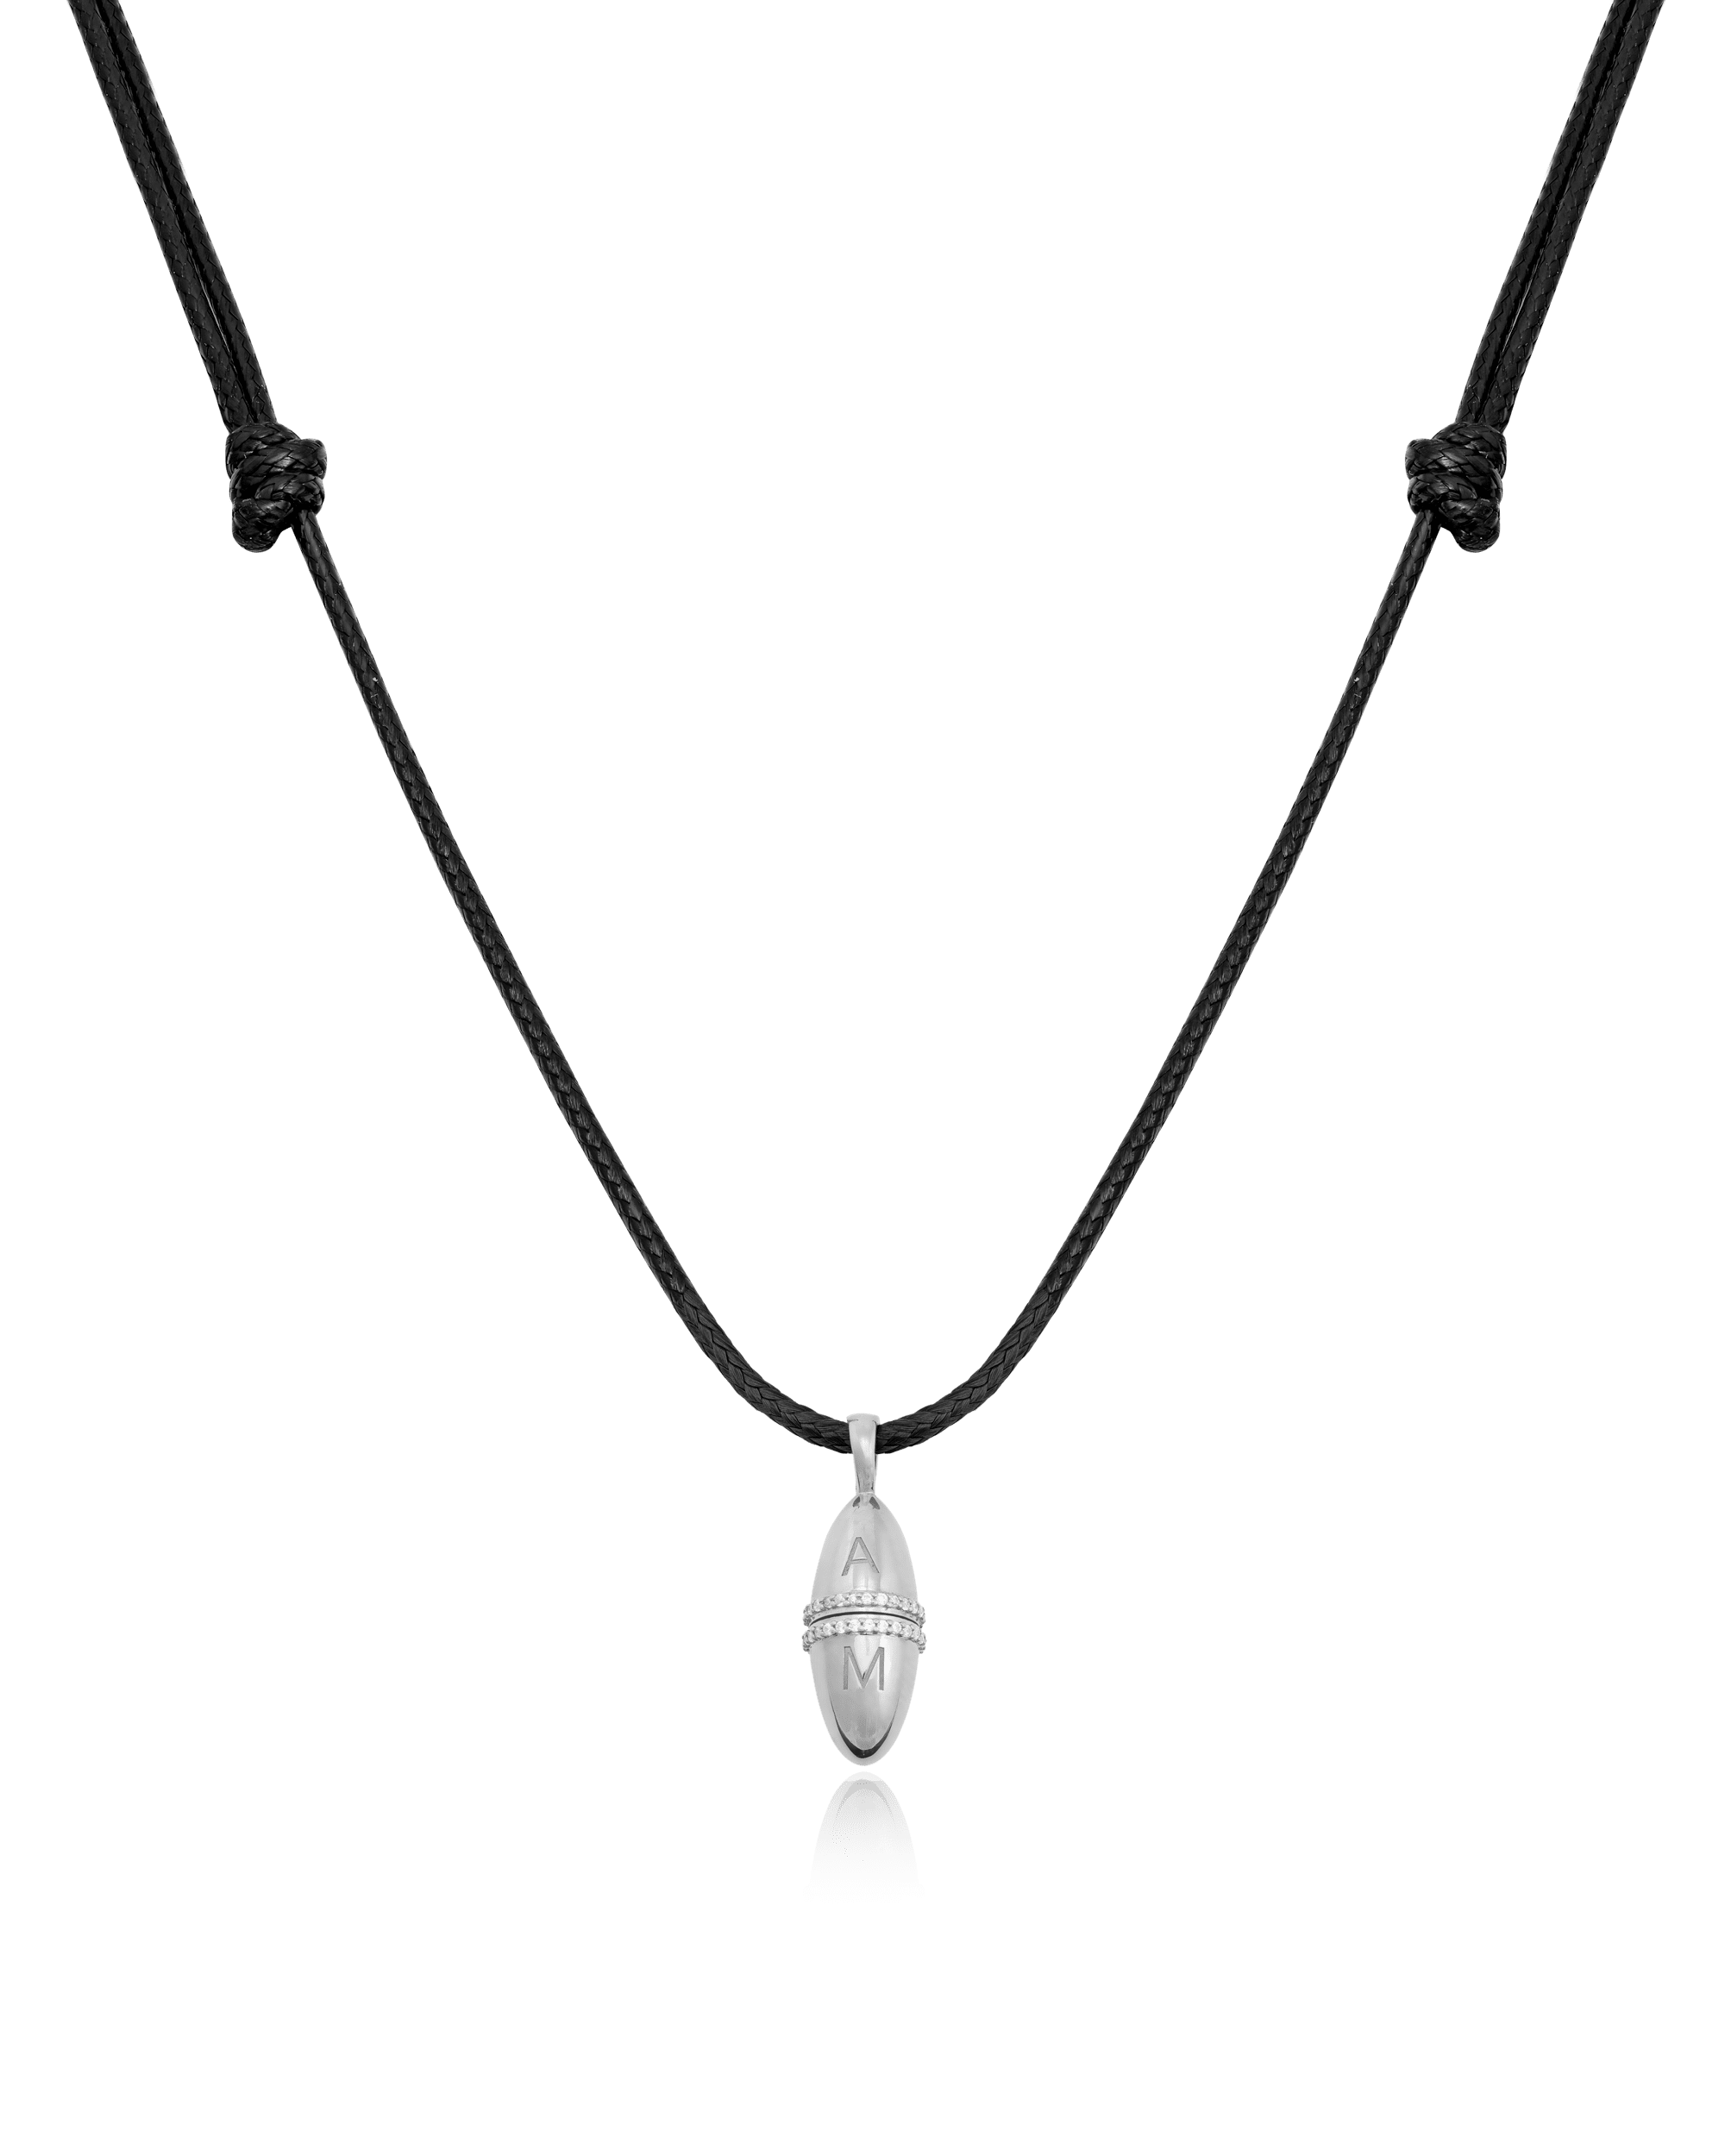 Fabergé Cord Necklace - 925 Sterling Silver Necklaces magal-dev Black Adjustable Leather Cord 20"-24" 